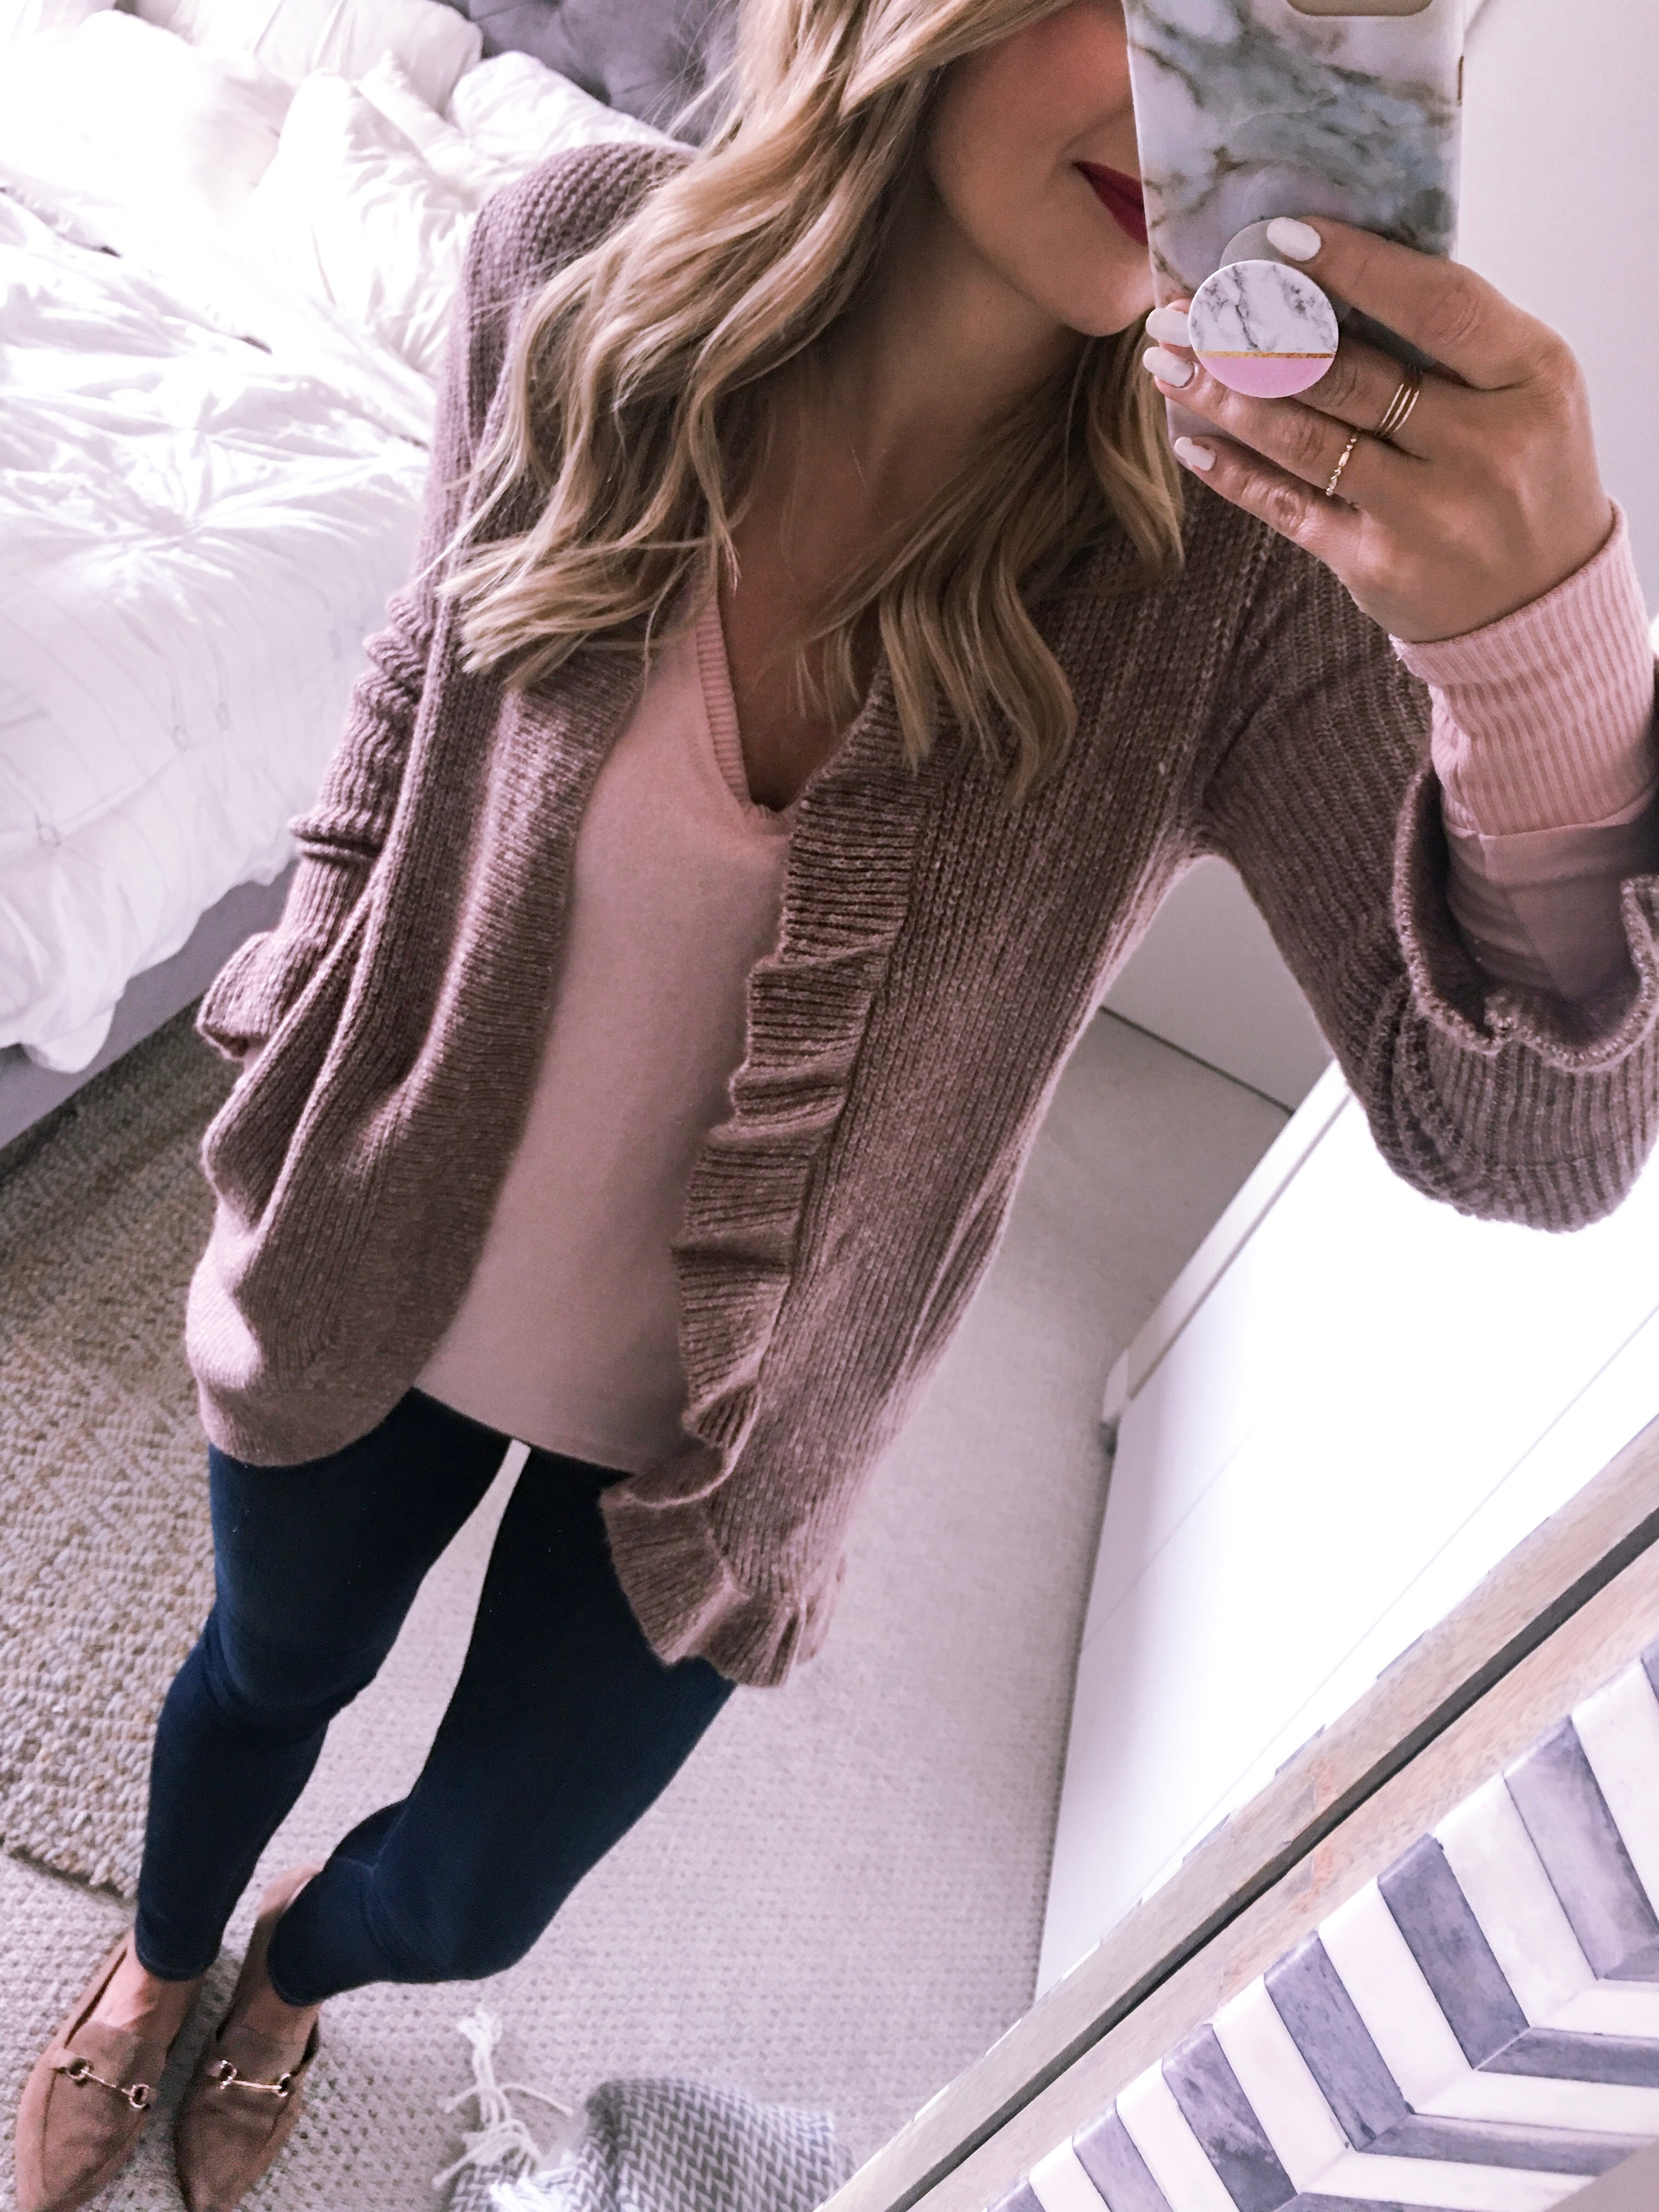 ruffle hem cardigan and pink v-neck knit sweater from nordstrom